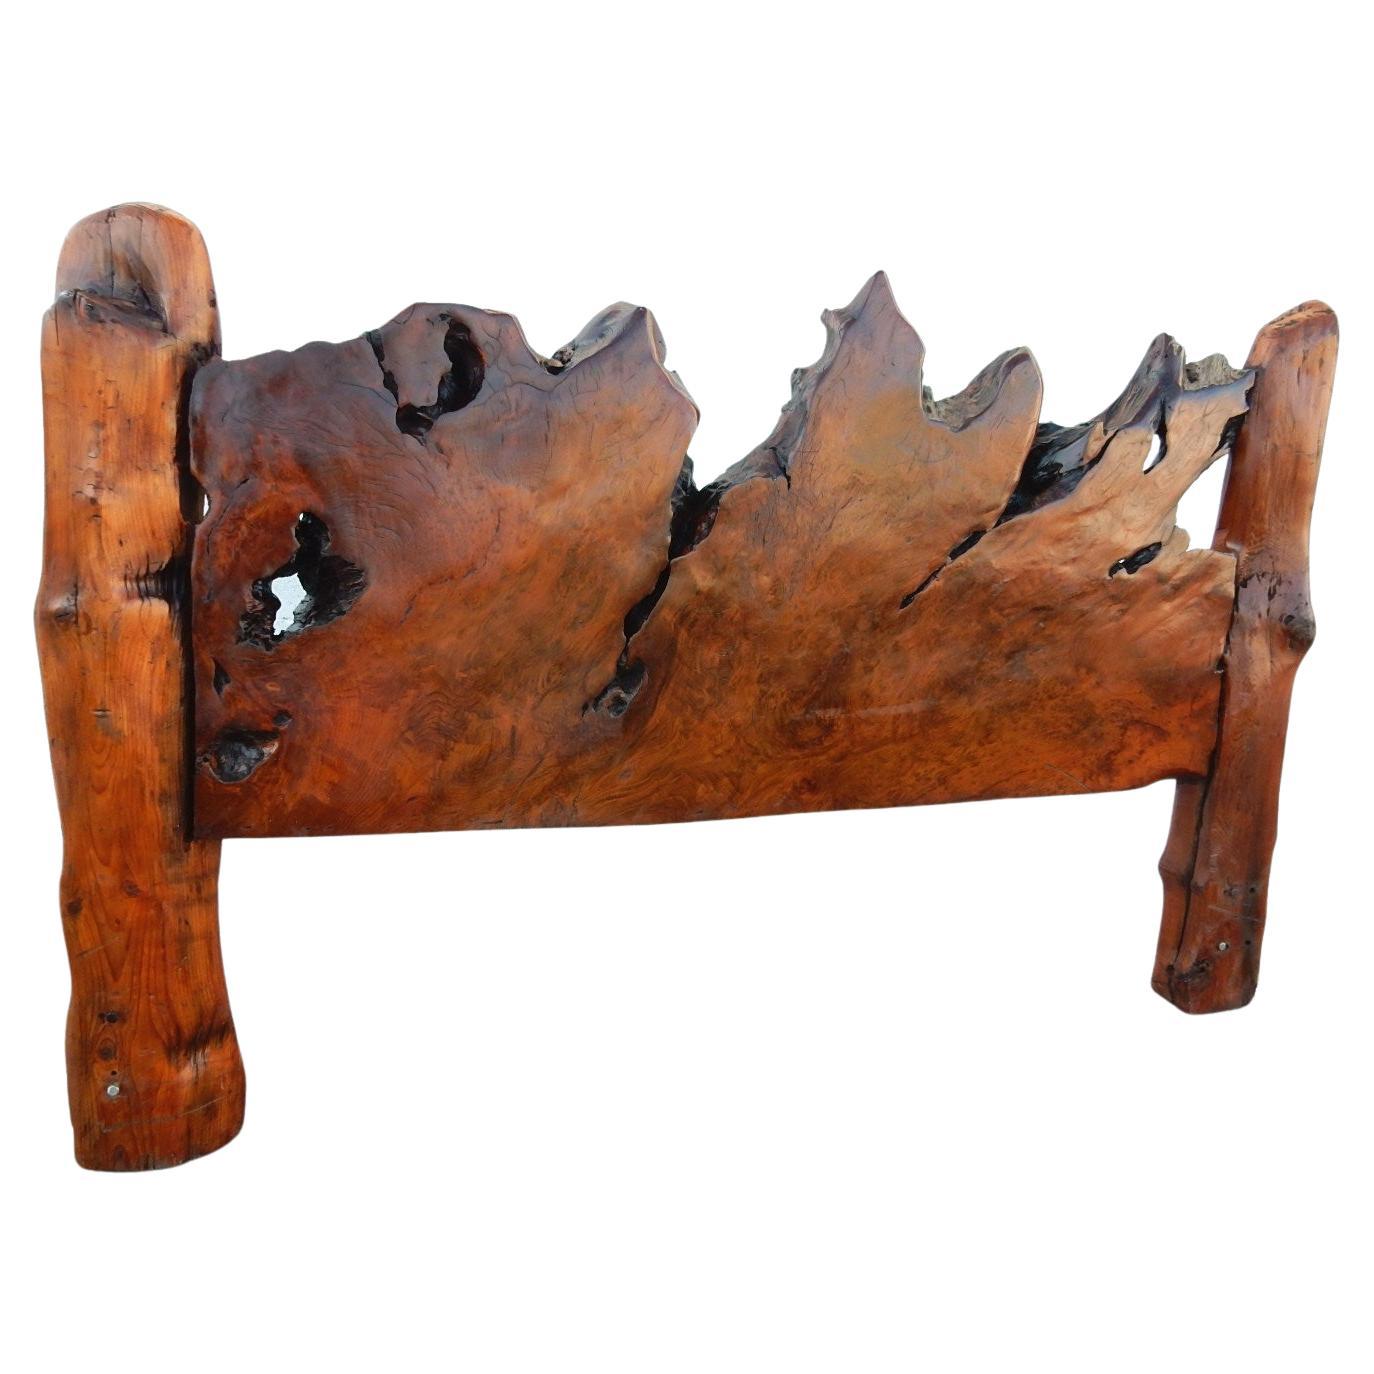 Handcrafted California redwood live edge burl headboard and footboard
by famed sculptor Steven Siegel for Burl Bros, circa 1970s.
King-size adjustable holes for regular or Cal king frame.
This piece is amazing, organic, completely original,